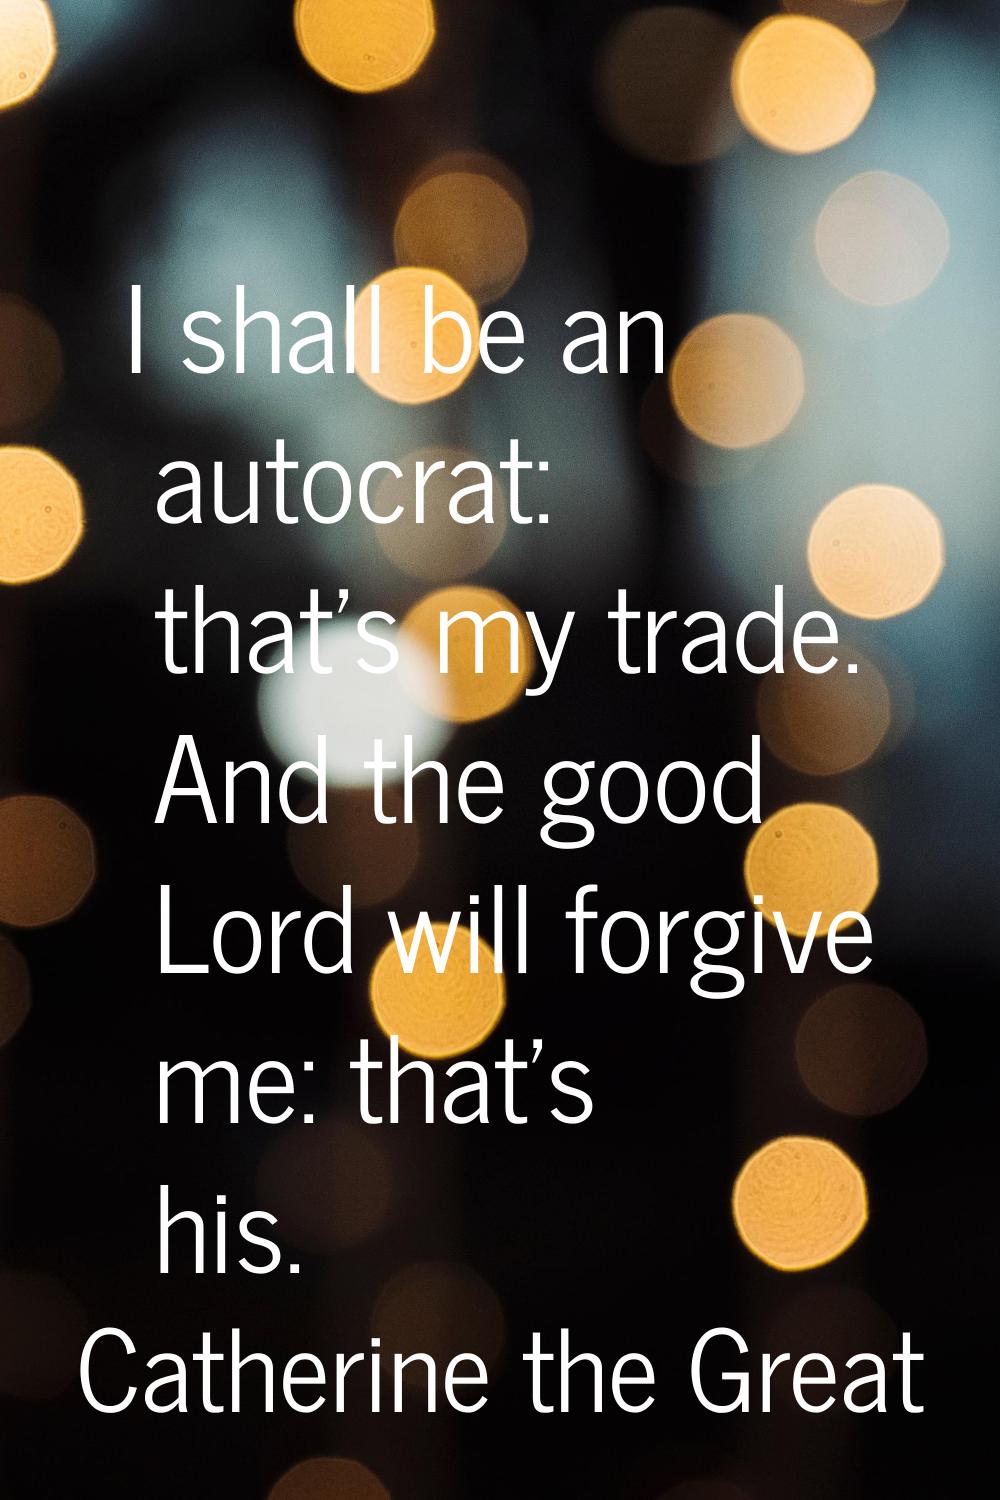 I shall be an autocrat: that's my trade. And the good Lord will forgive me: that's his.